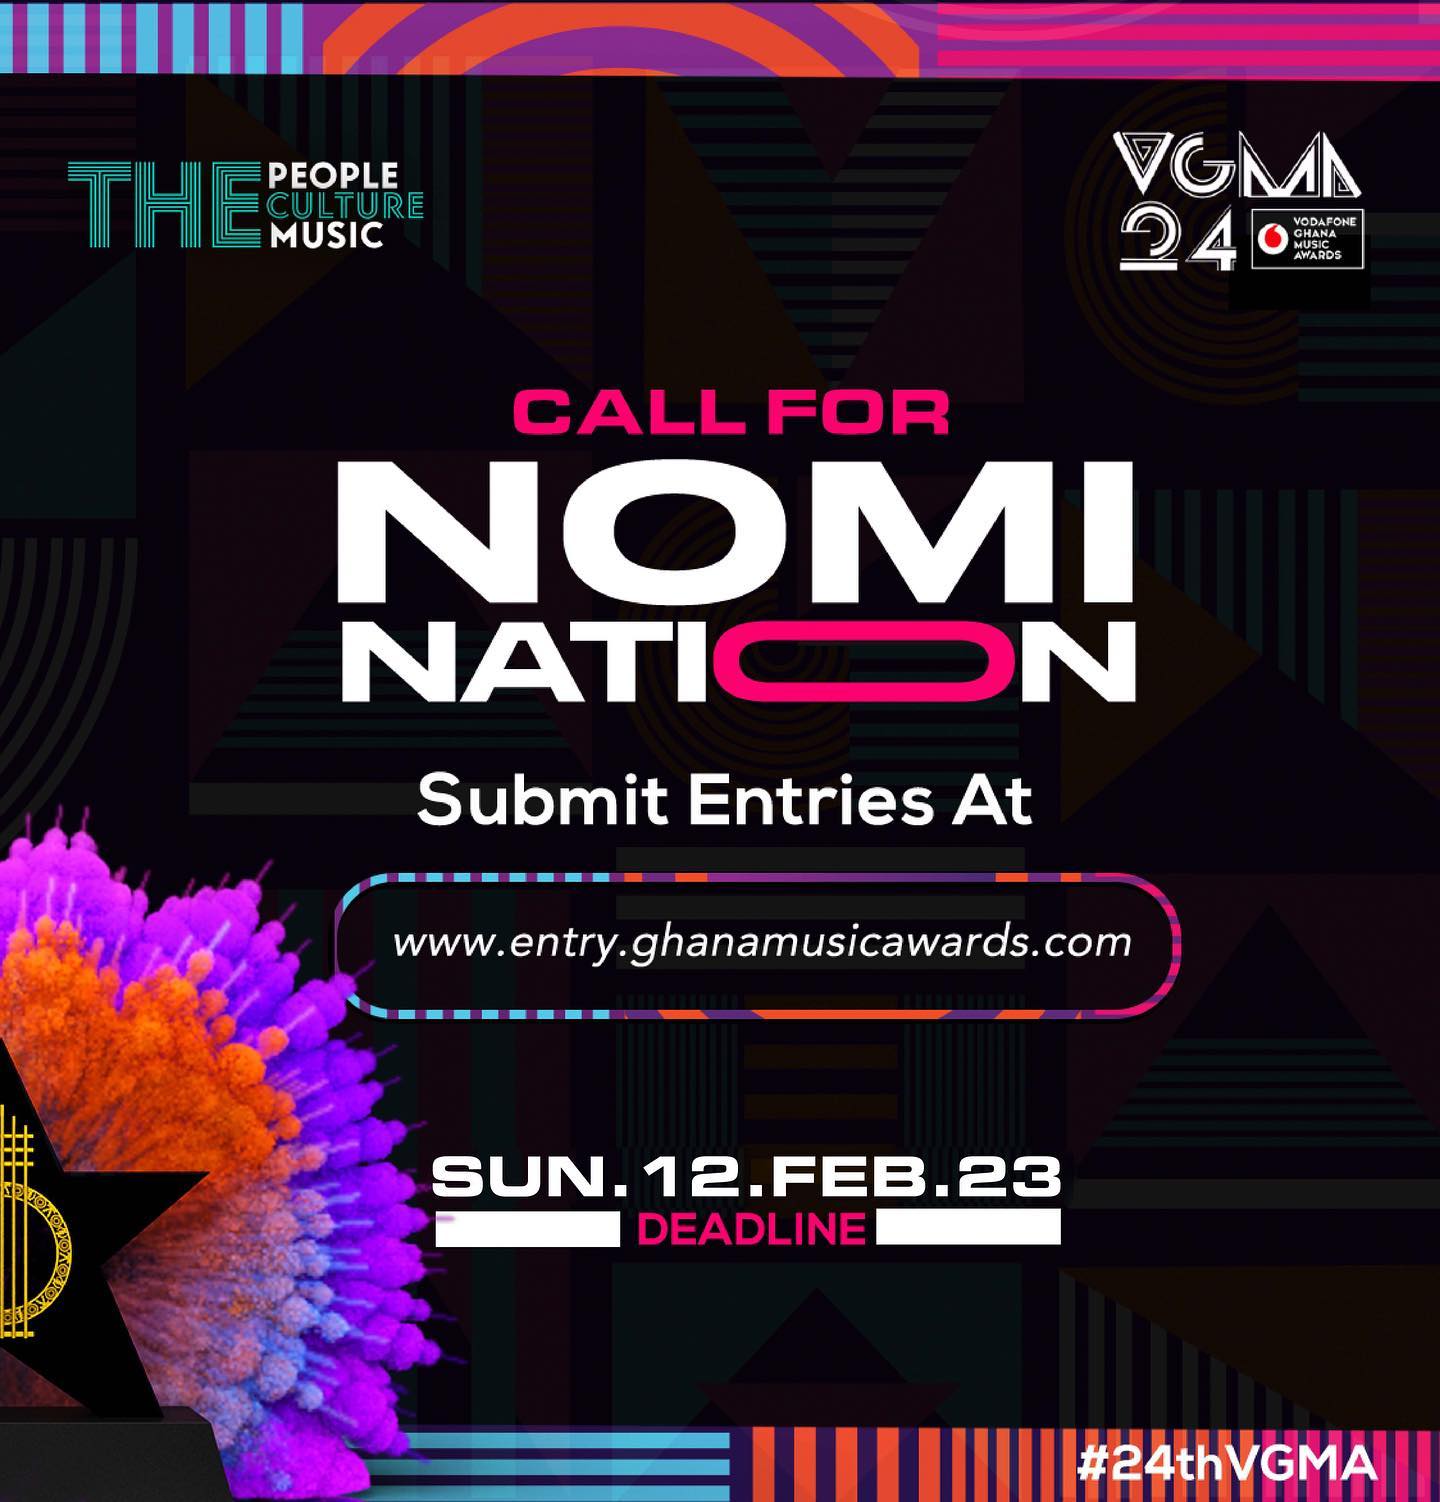 Nominations open for 24th Vodafone Ghana Music Awards